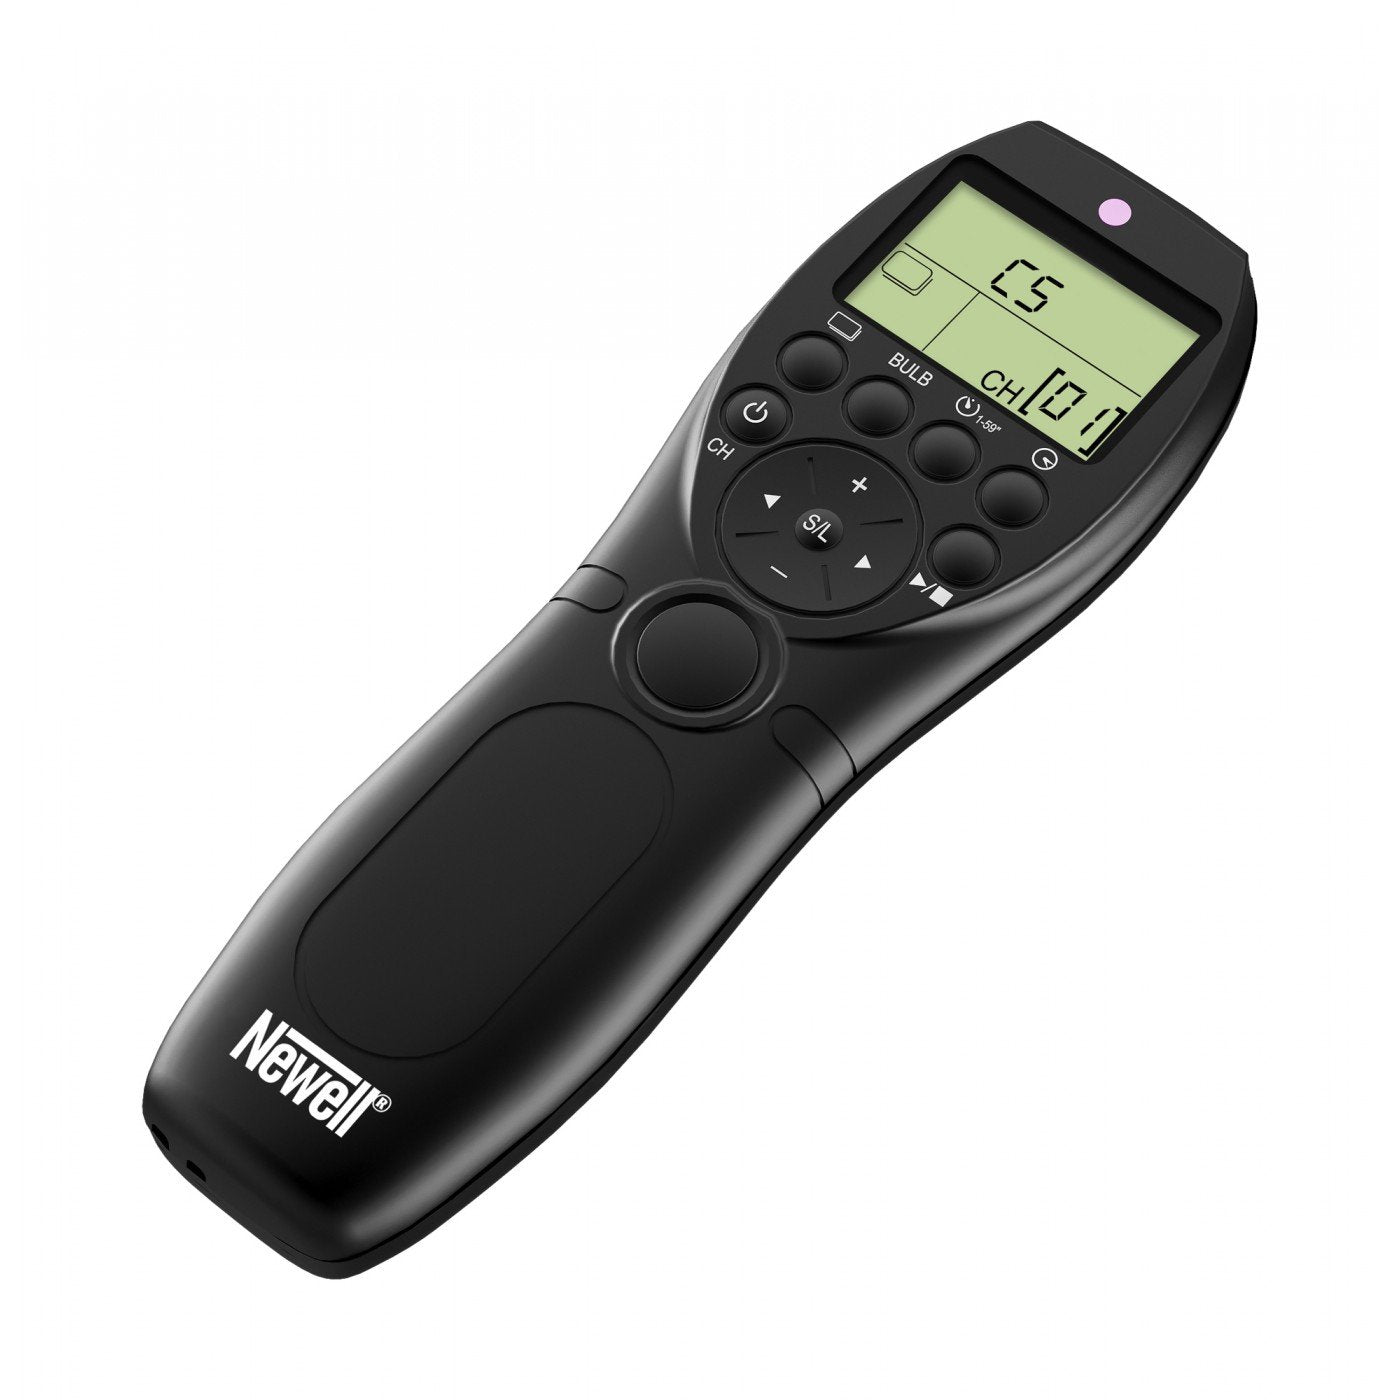 Product Image of Newell Wireless remote control with intervalometer for Nikon